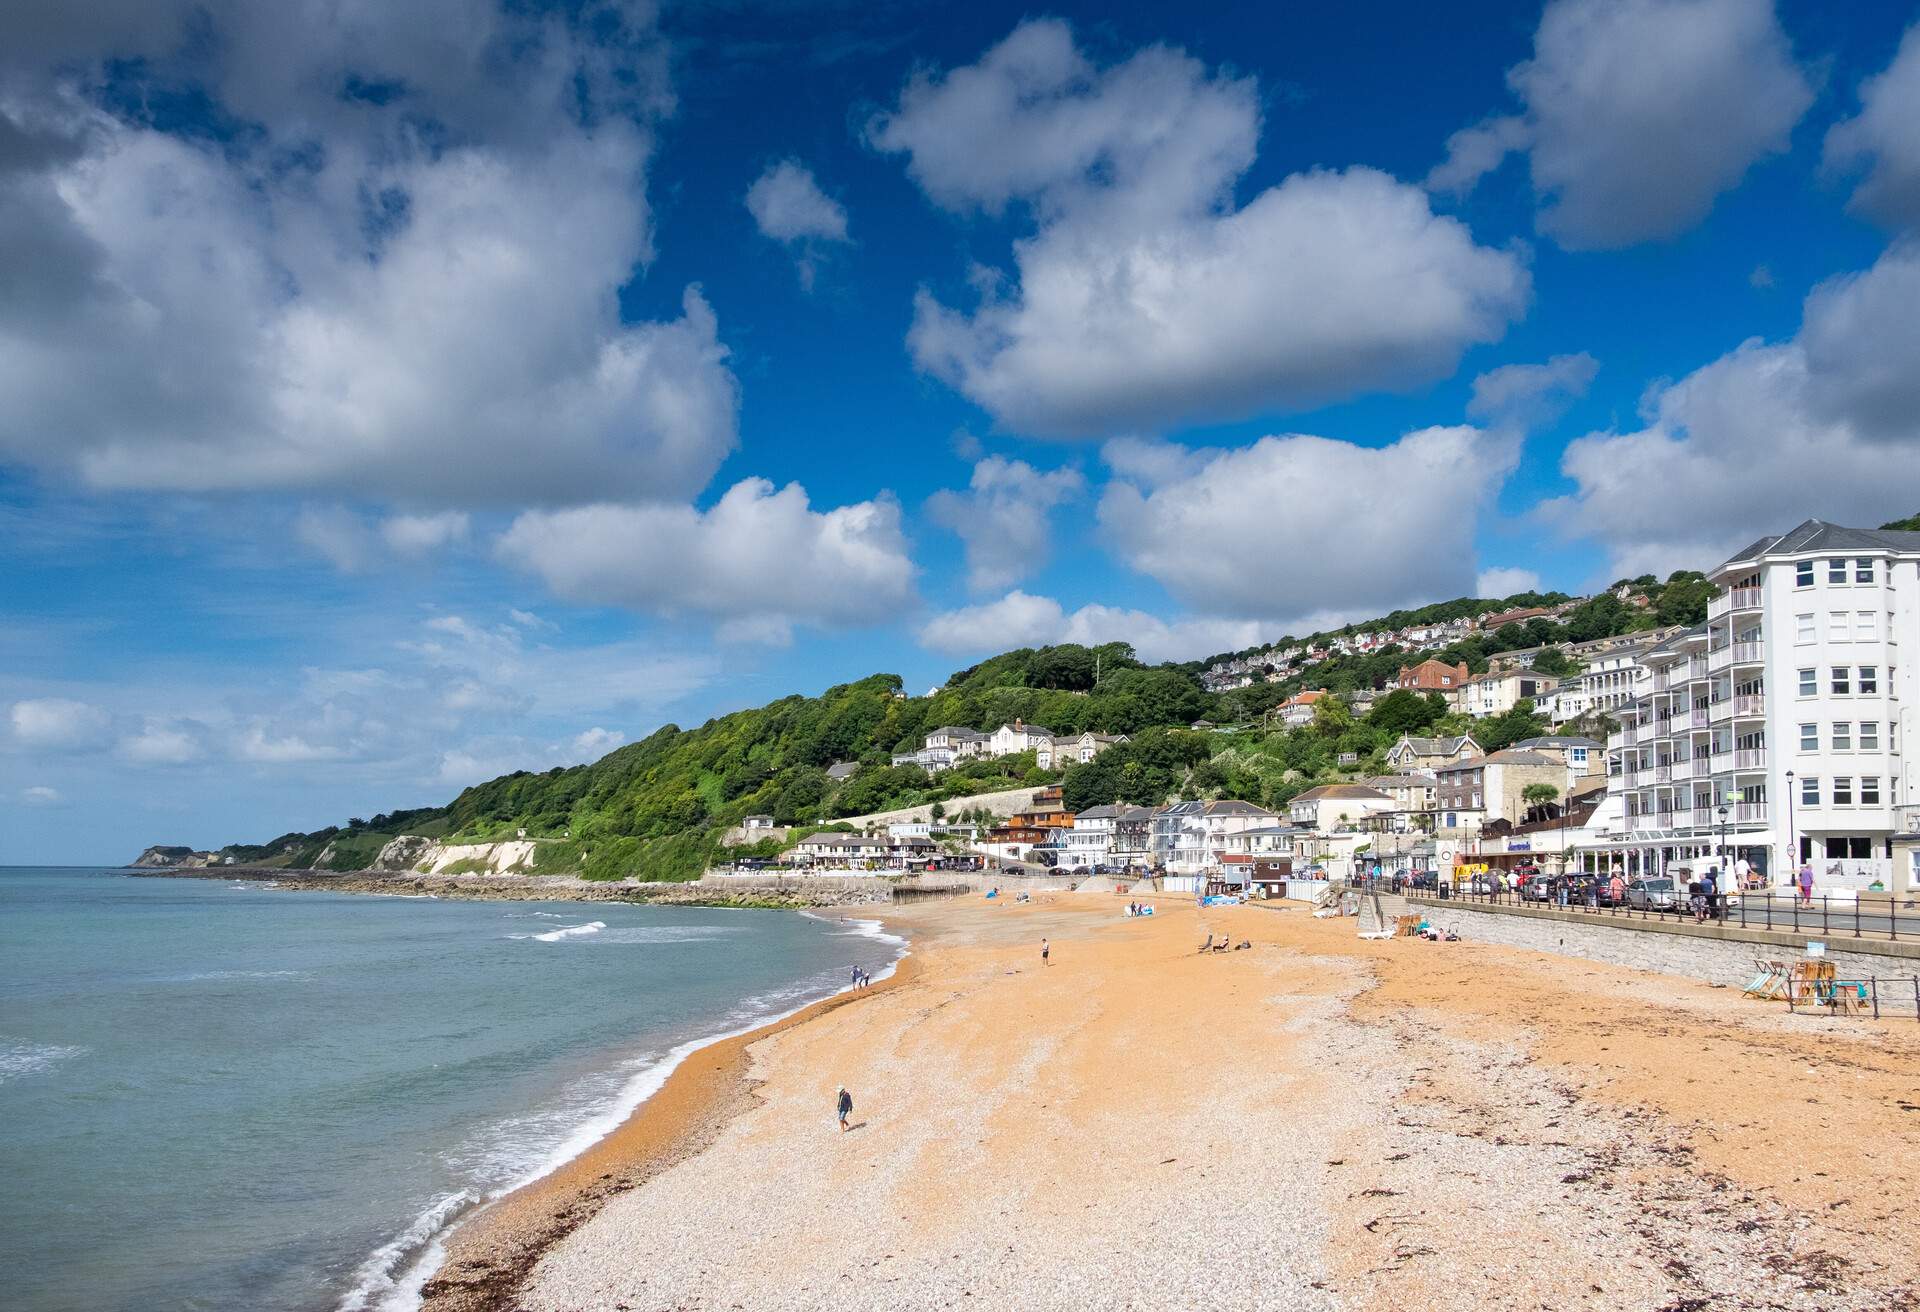 Ventnor seafront on a bright sunny Summers morning